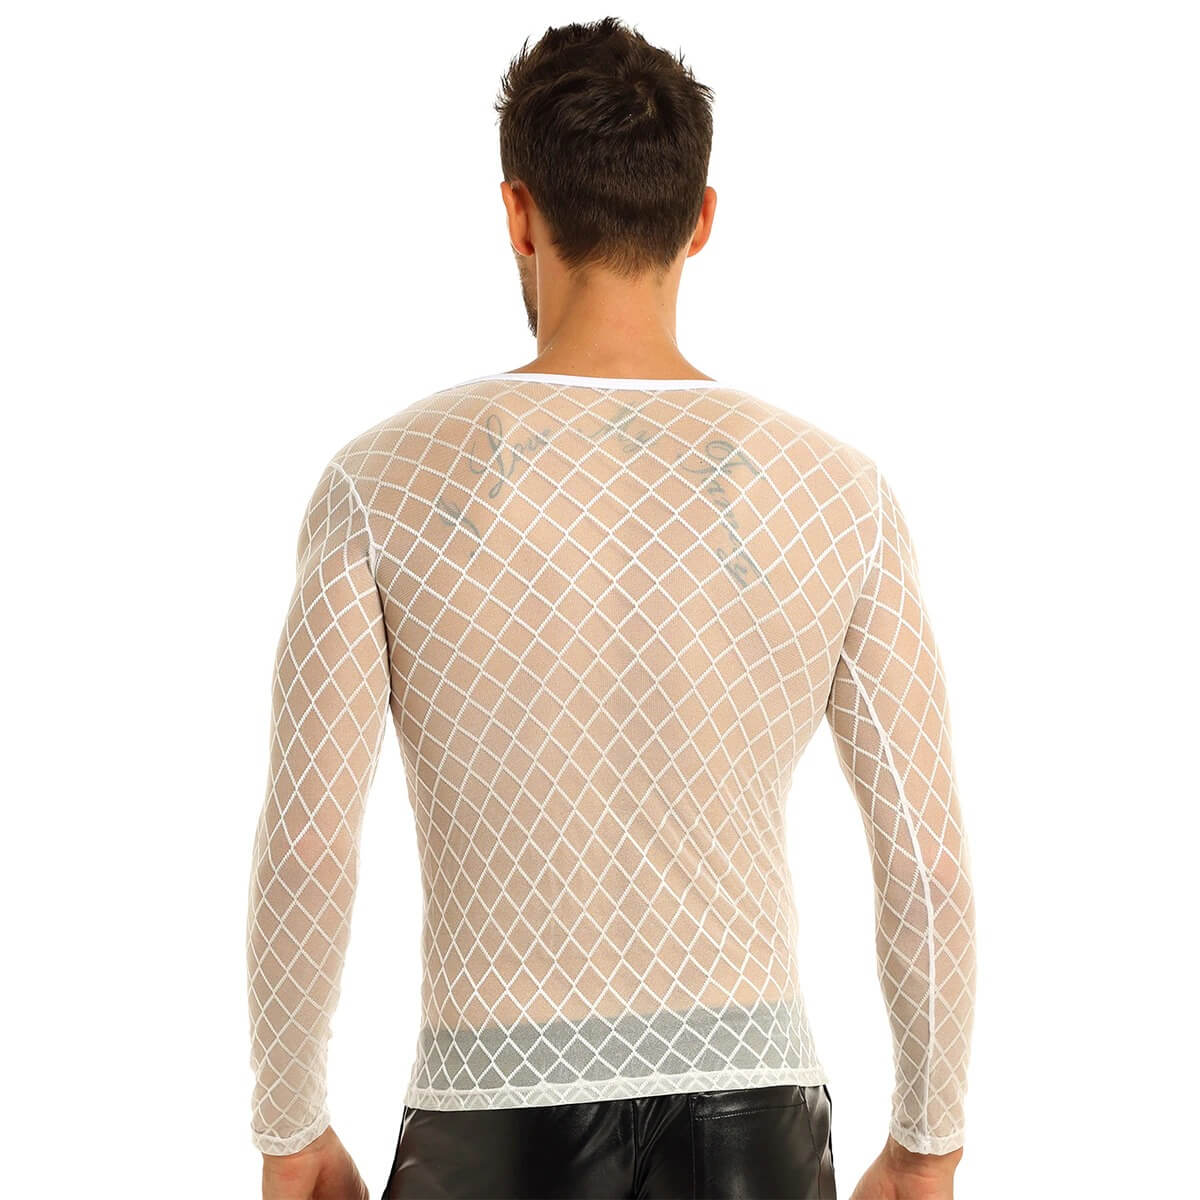 Sexy Transparent Men's Clothing / Thiting-Fitting T-Shirt With Long Sleeve / Male Erotic Outfits - EVE's SECRETS